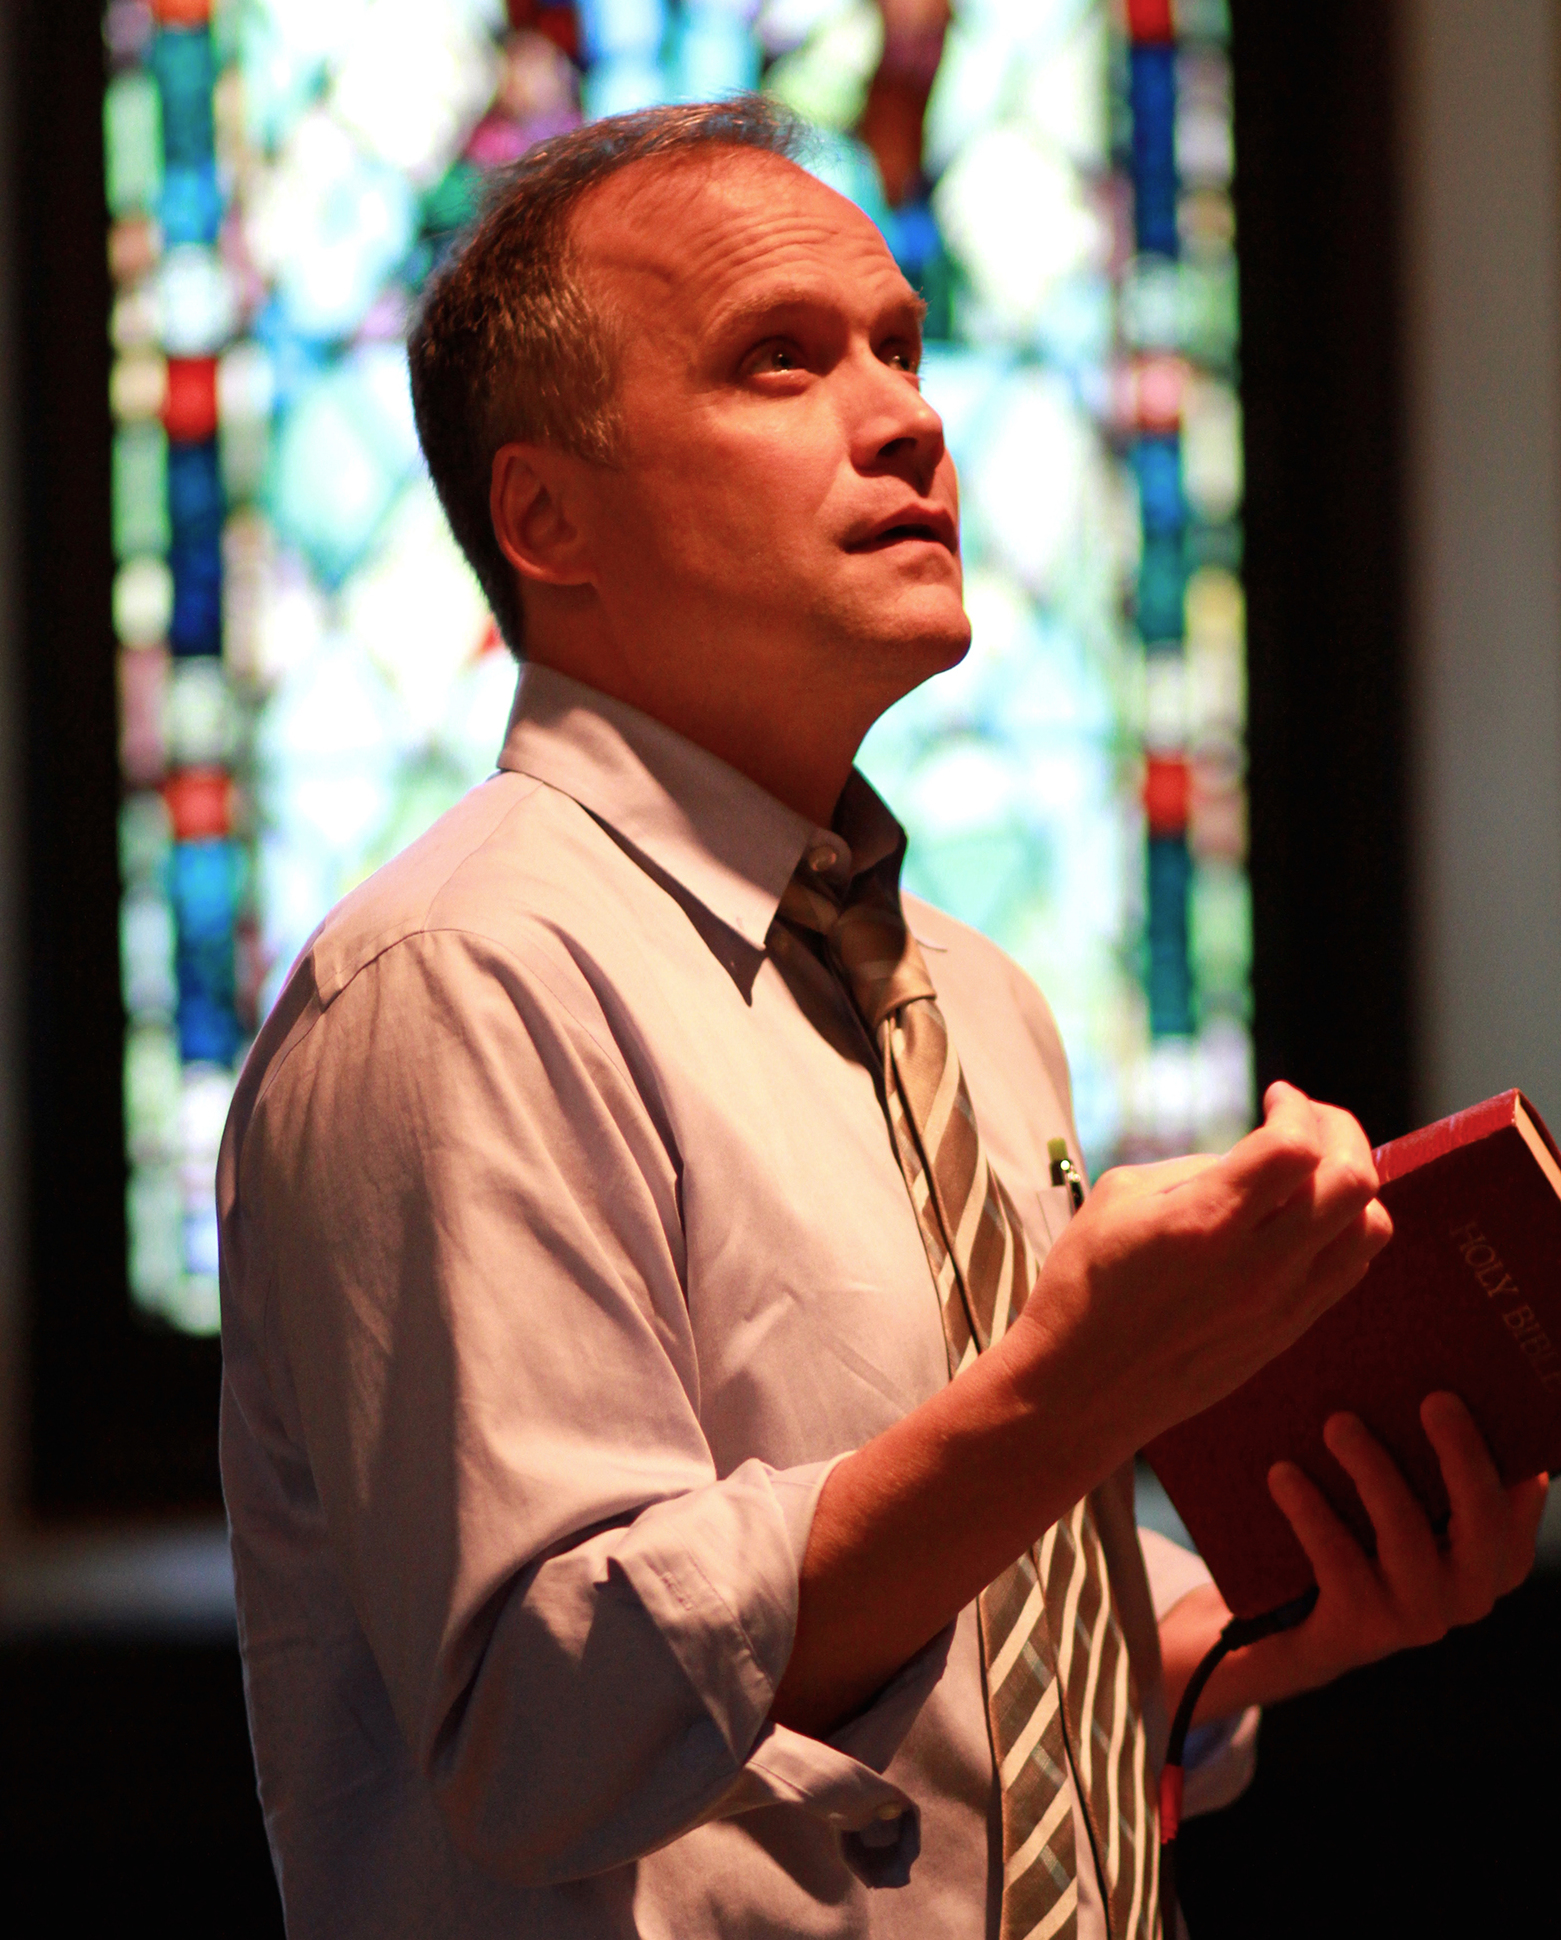 Andrew Erskine Wheeler as Pastor Paul in Walking Shadow Theatre Company’s “The Christians.”